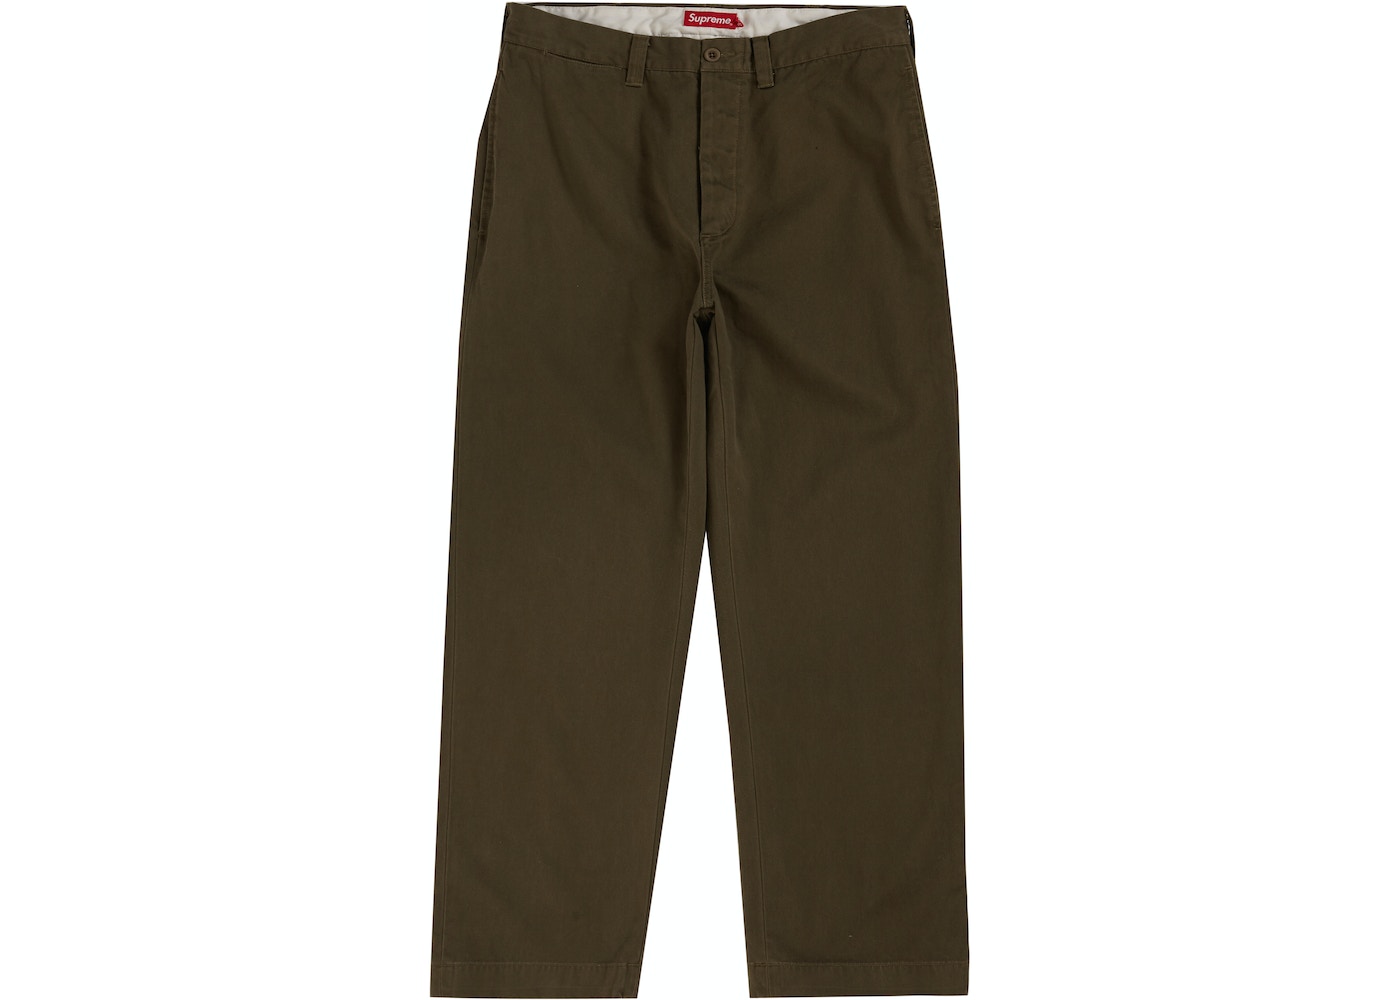 Supreme Crown Chino Pant Olive - FW19